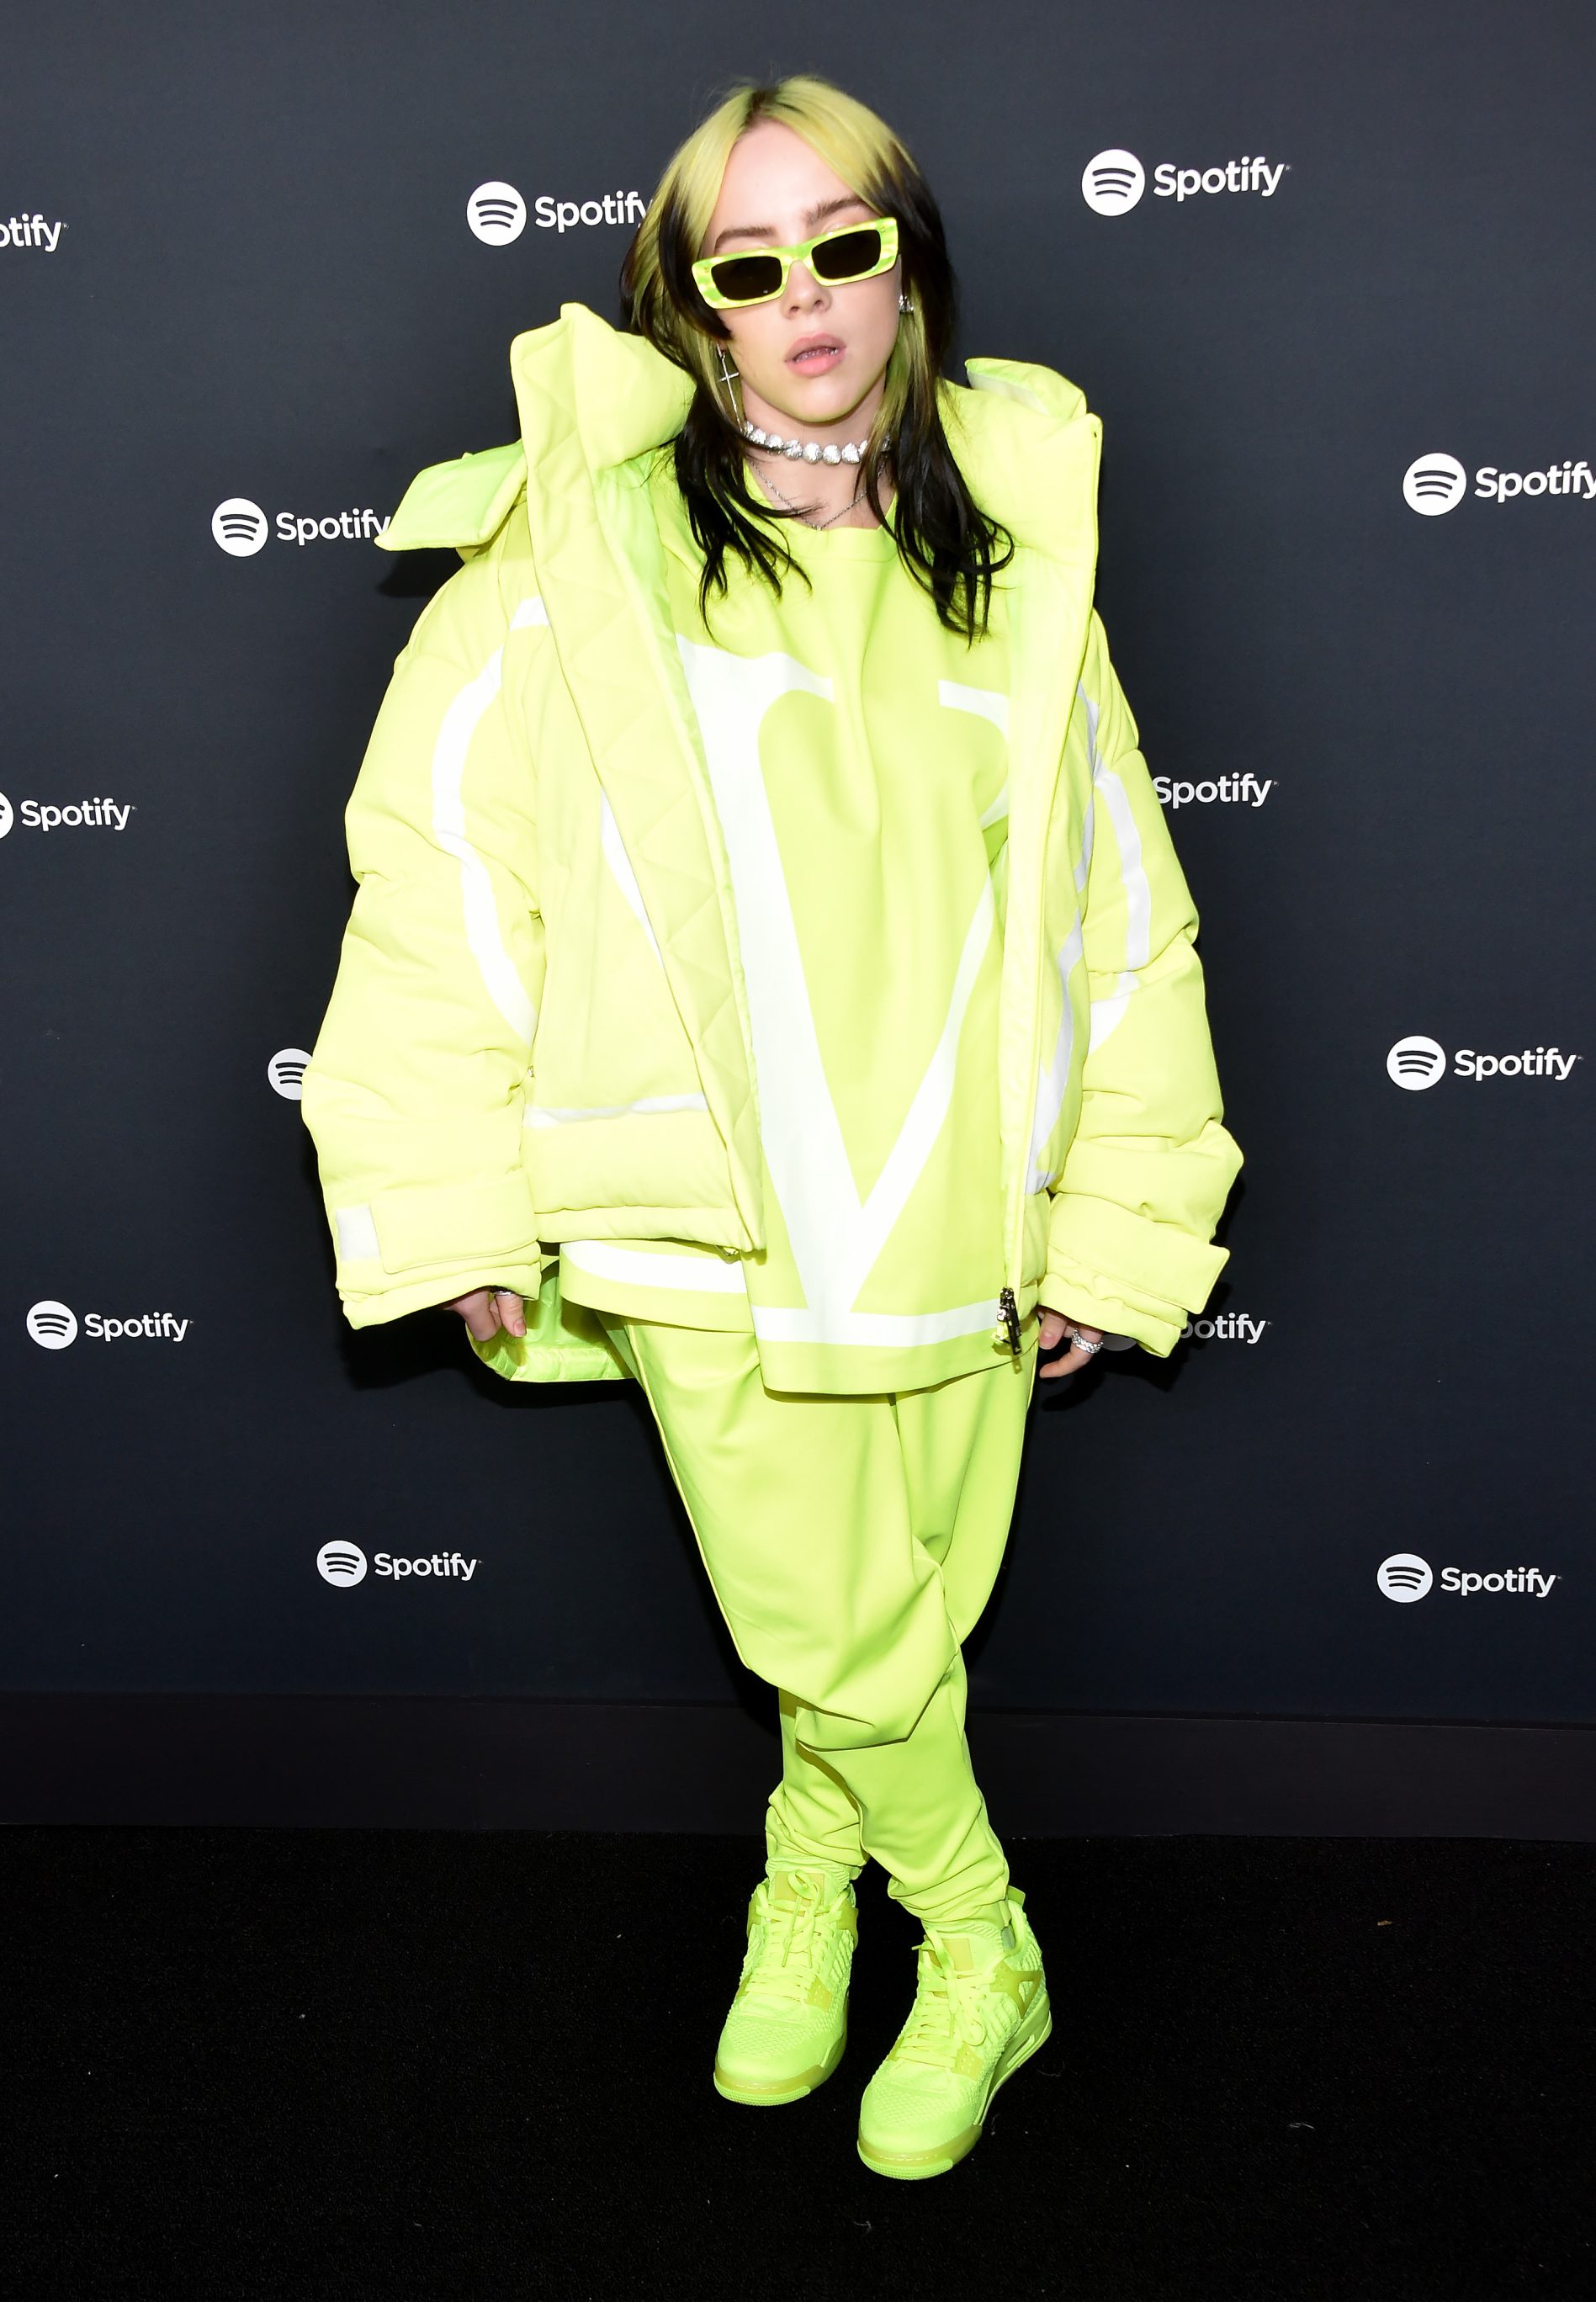 Spotify Best New Artist 2020 Outfit